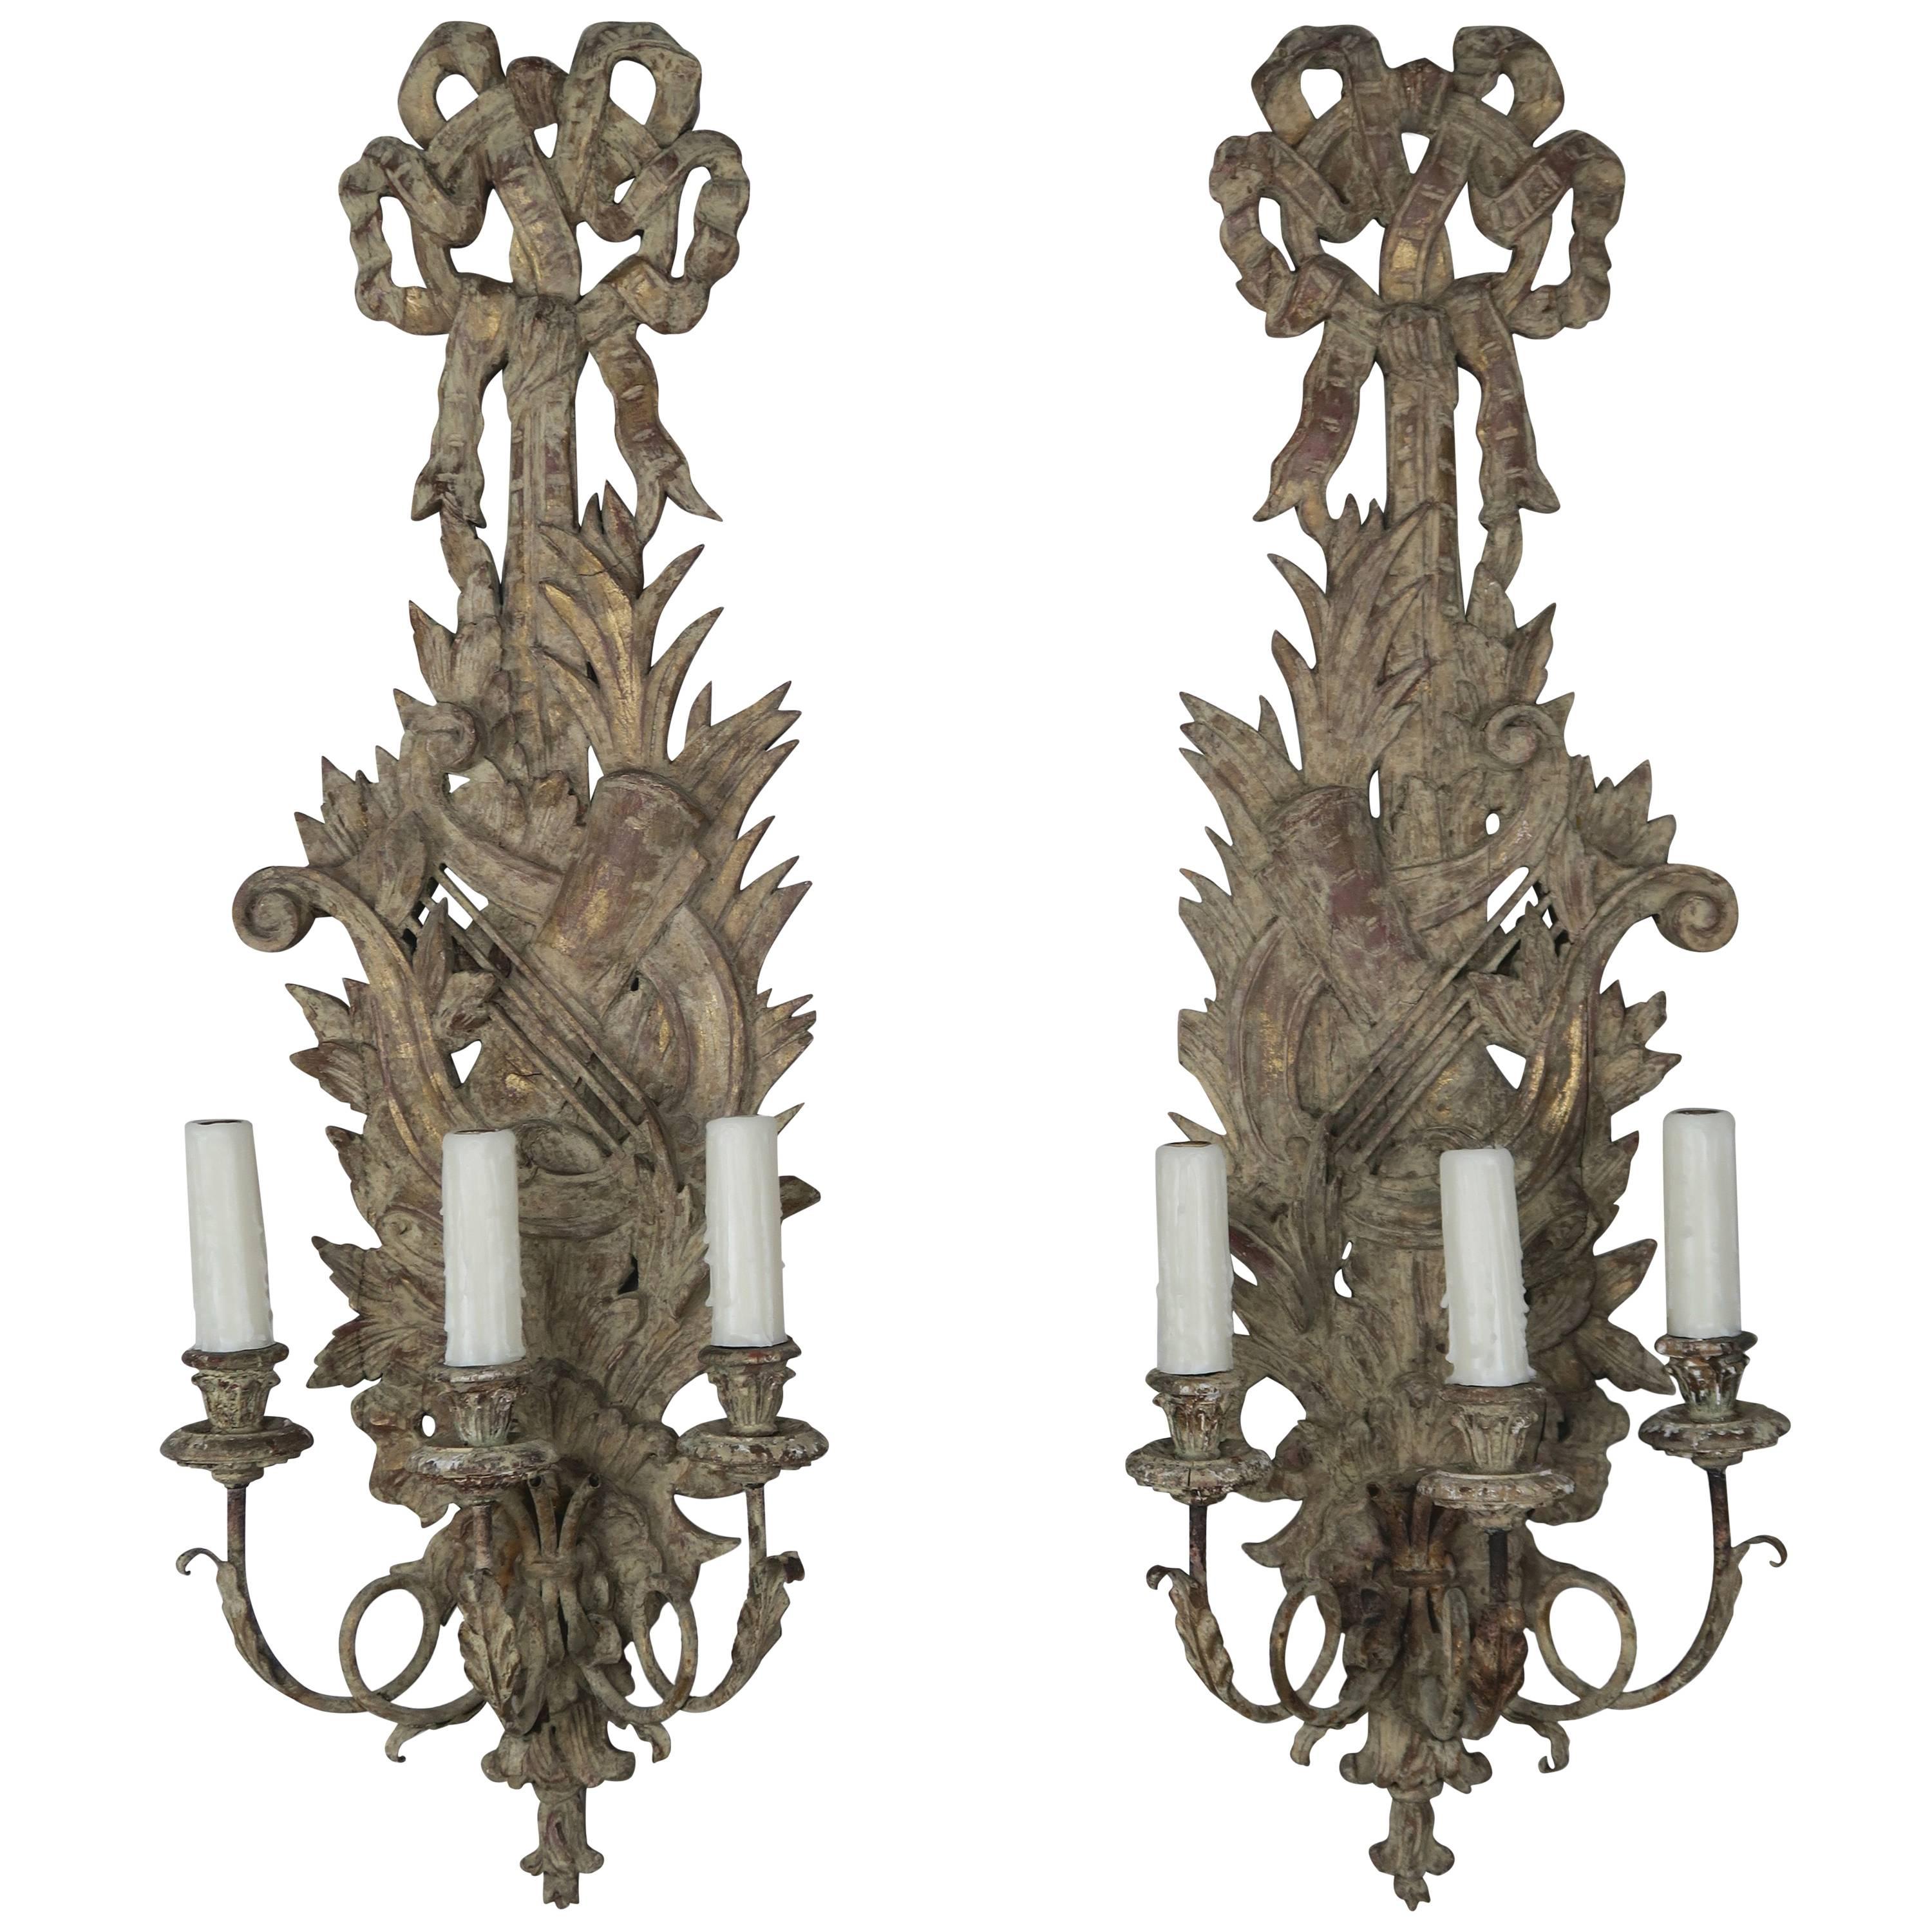 Pair of French Carved Wood Sconces, circa 1920